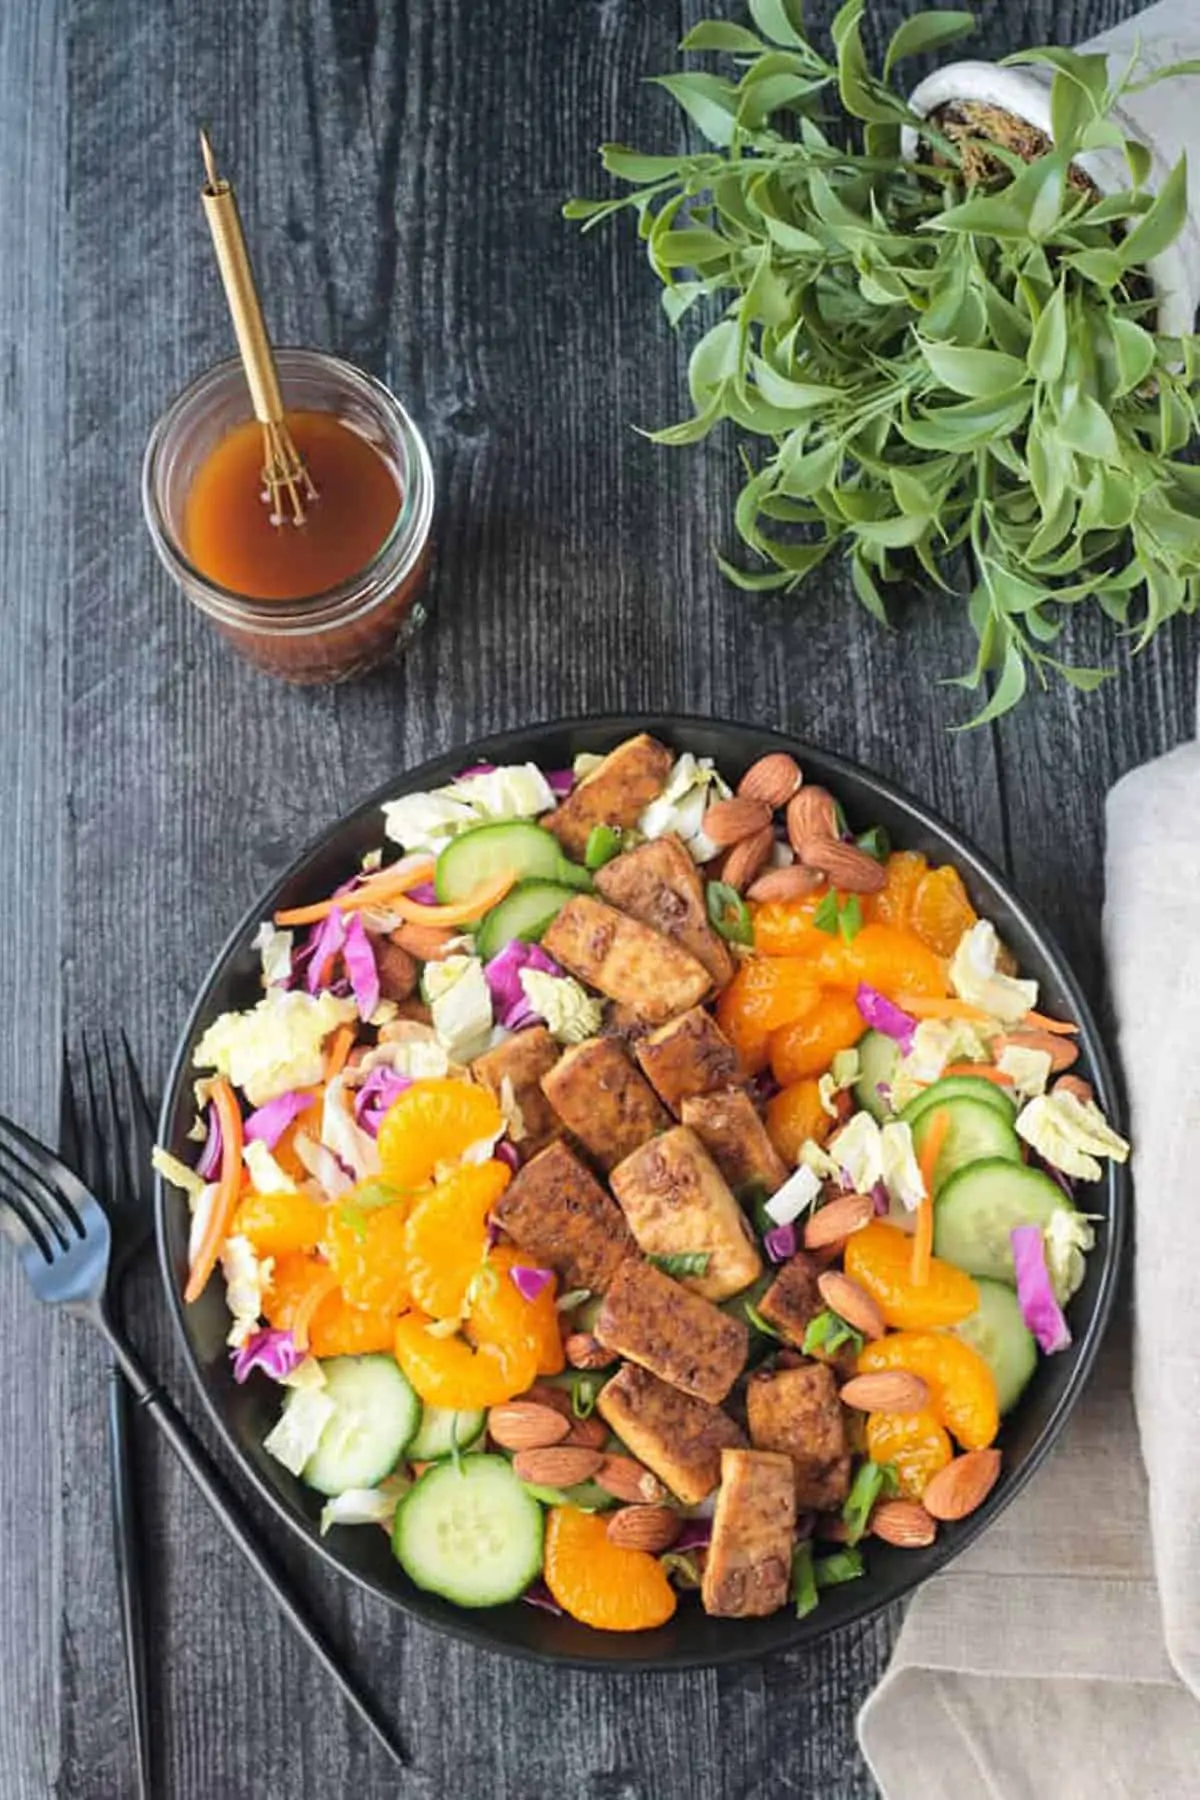 Chinese tofu salad with tofu, mandarin, cabbage, carrots, cucumber, almonds, with dressing and fork in the background.